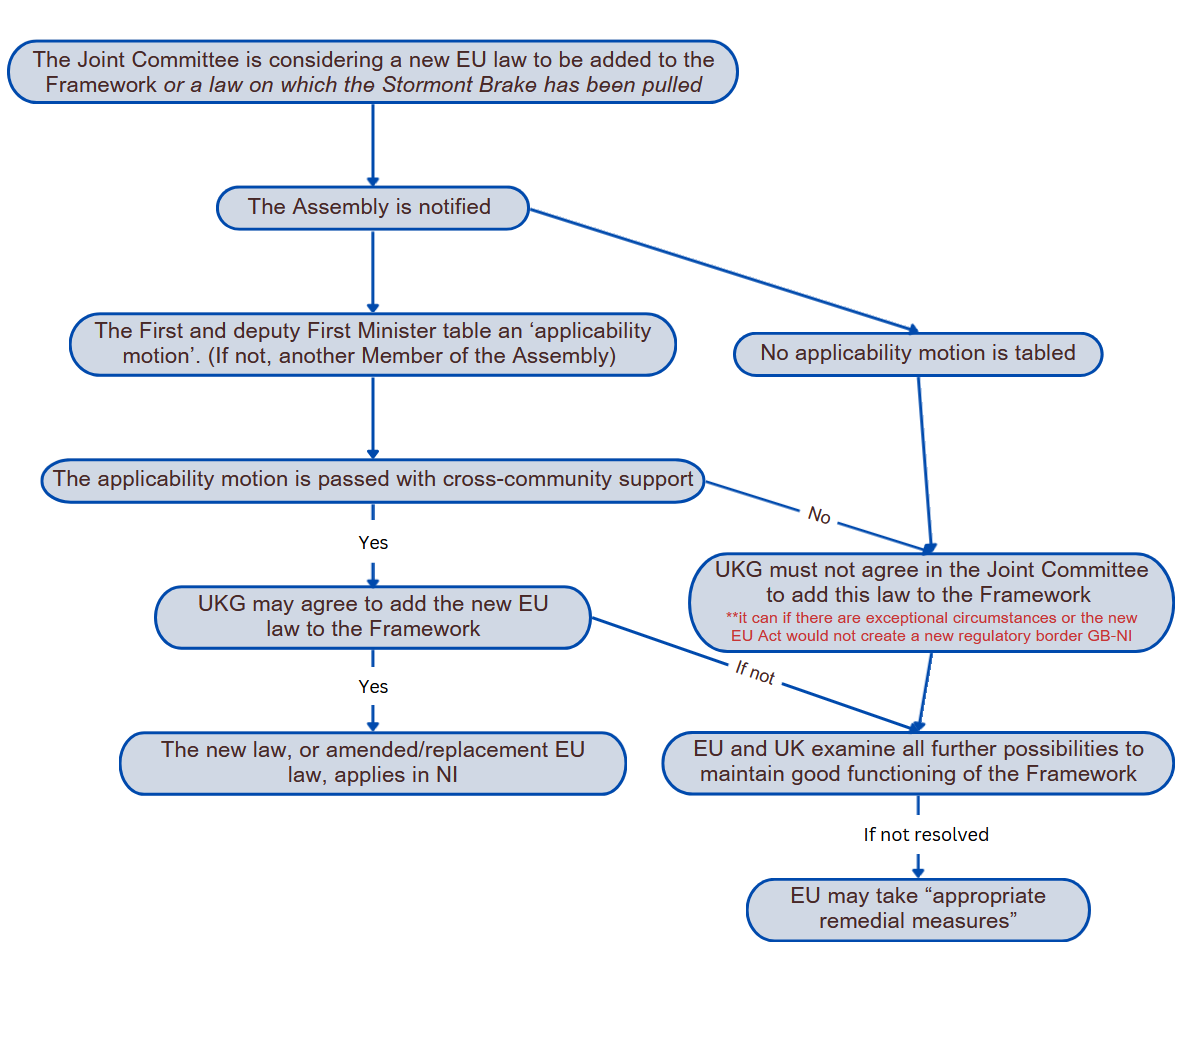 A flowchart of the applicability motion flowchart, as set out in the text above